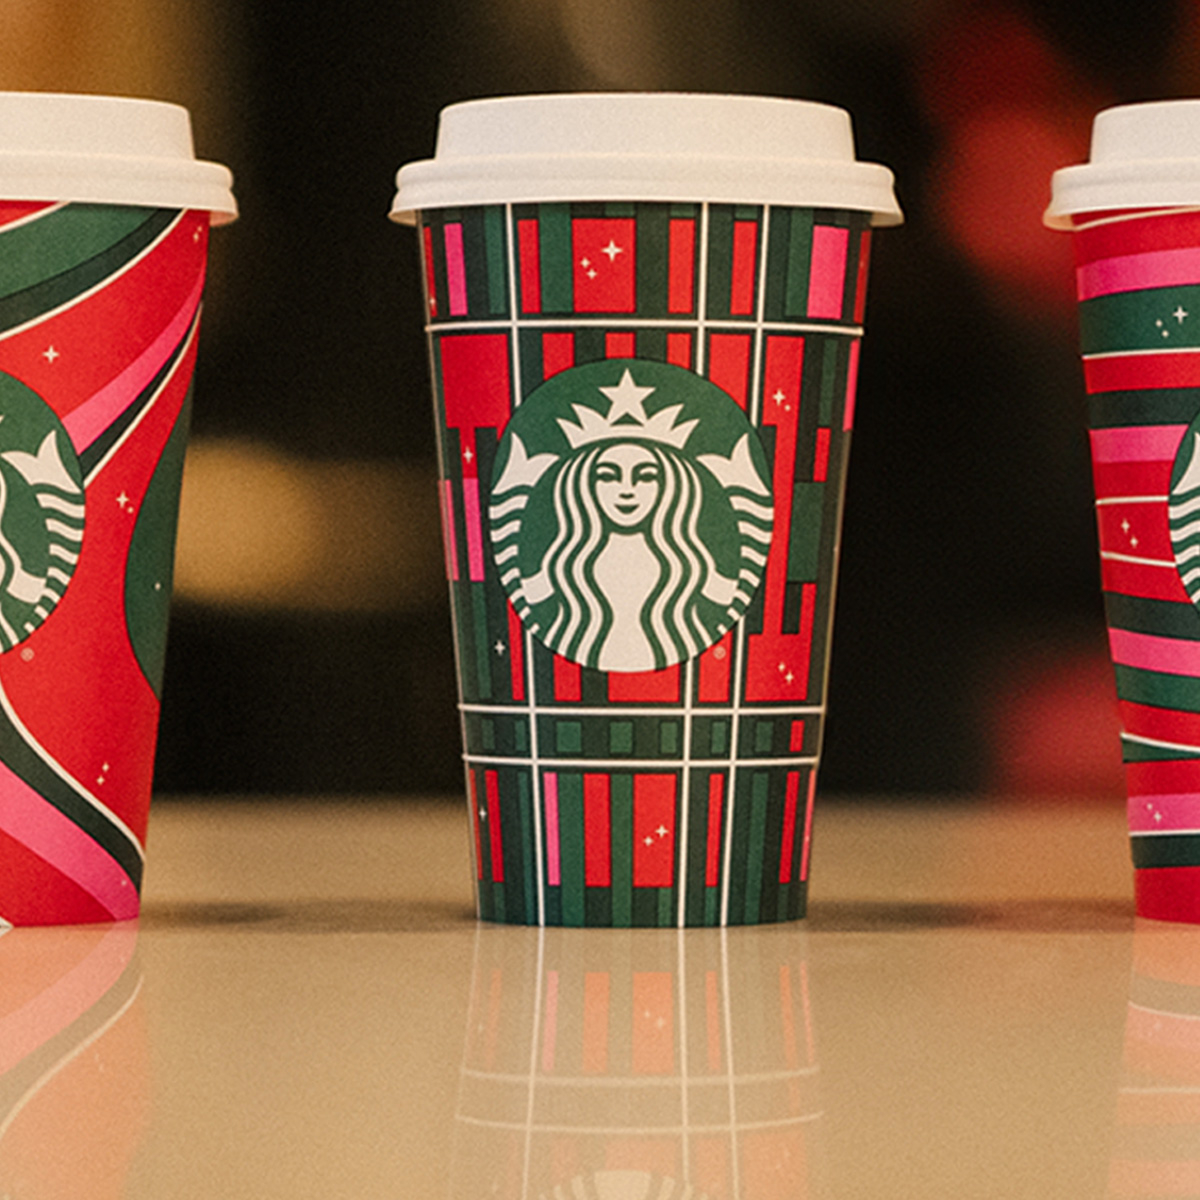 After last year's drama, Starbucks unveils holiday cups designed